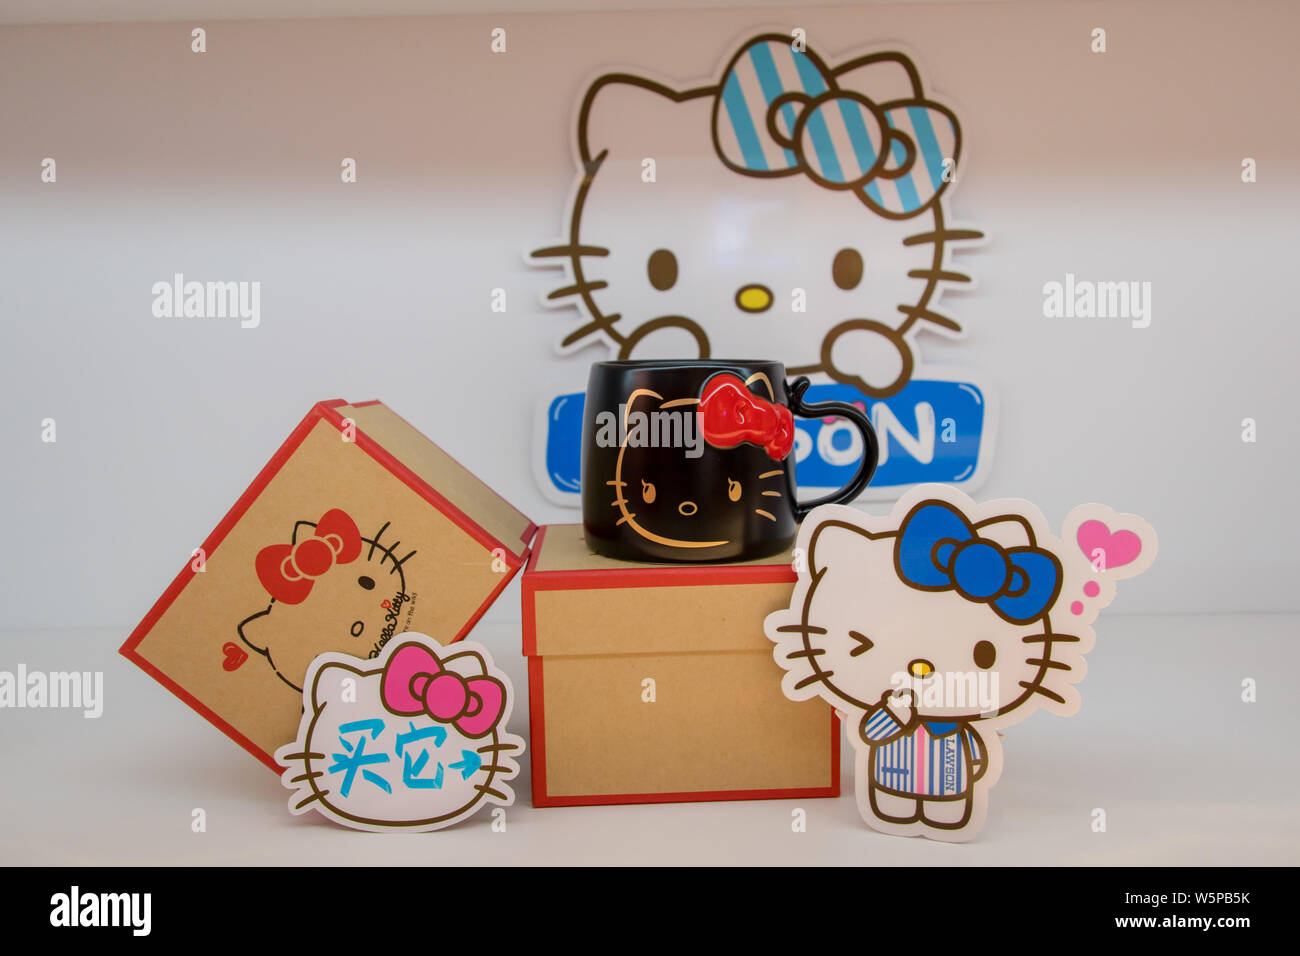 Hello Kitty Store in Siam Square One Mall, Bangkok Editorial Stock Image -  Image of assortment, editorial: 152146264